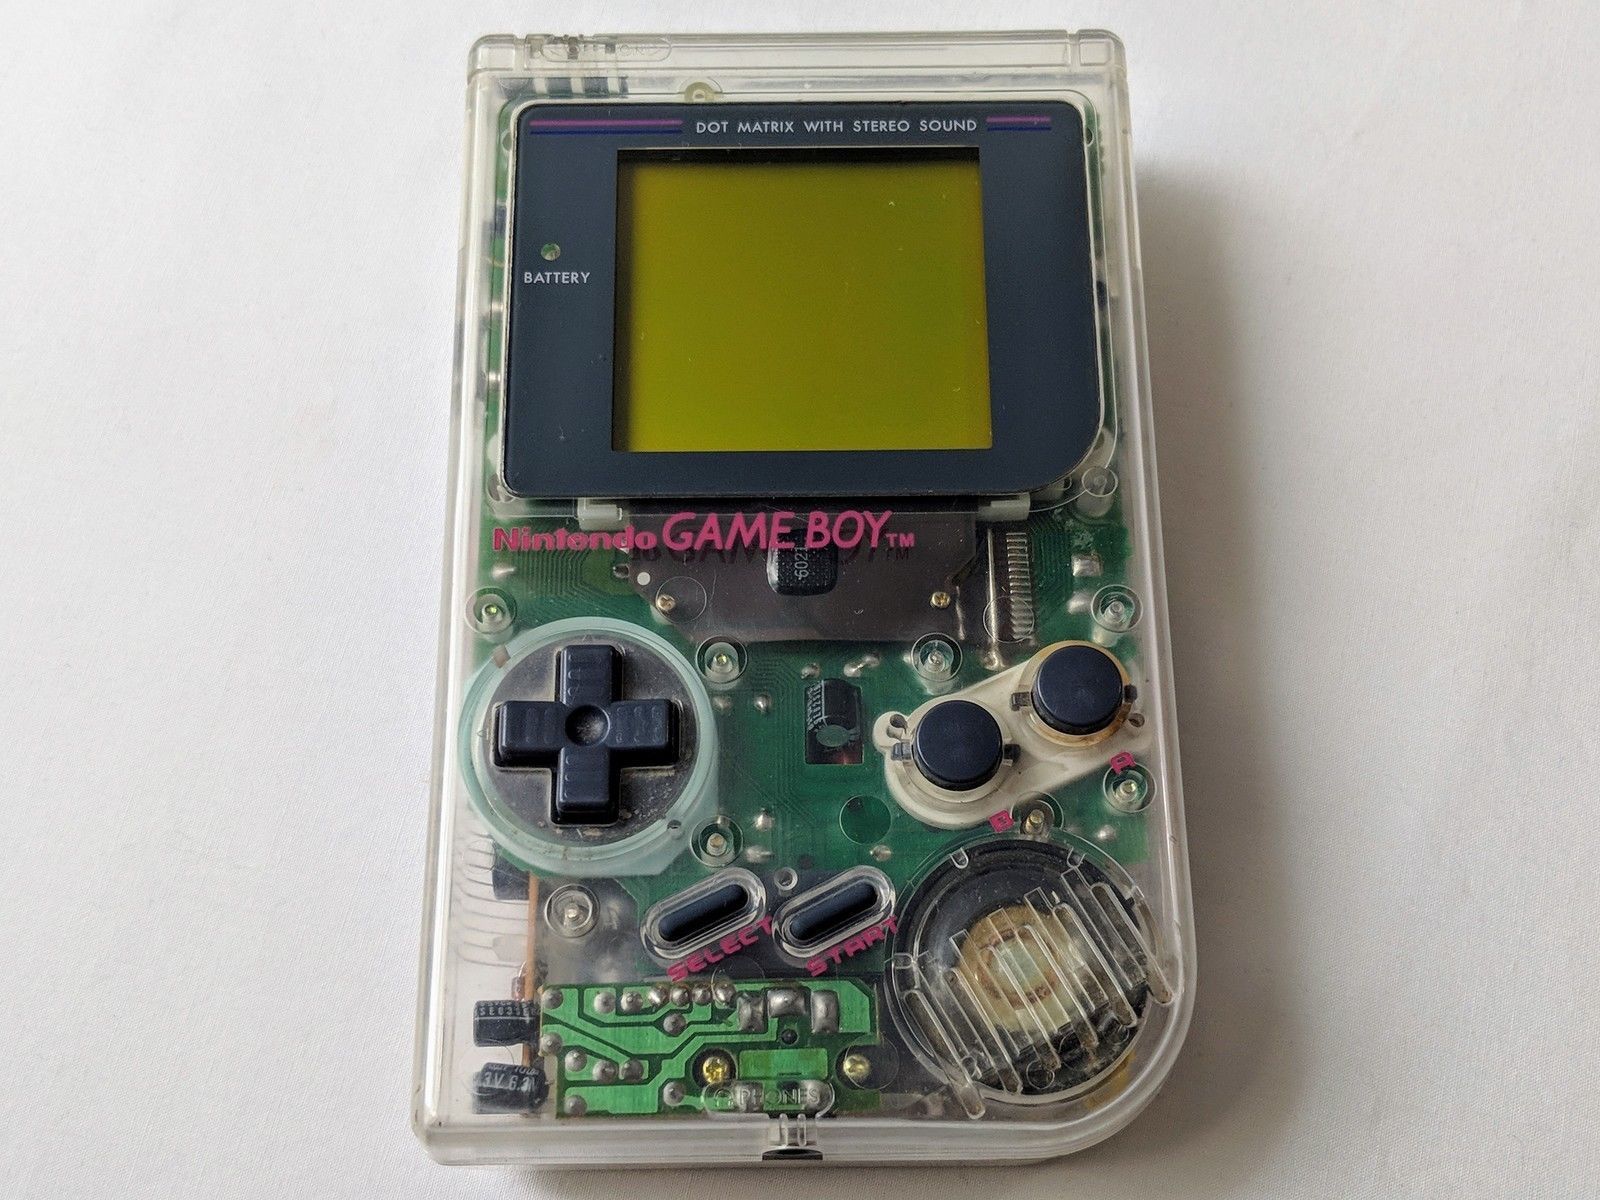 Original Nintendo Gameboy Clear Special Edition 1989 Fully Working in Original Clear Case